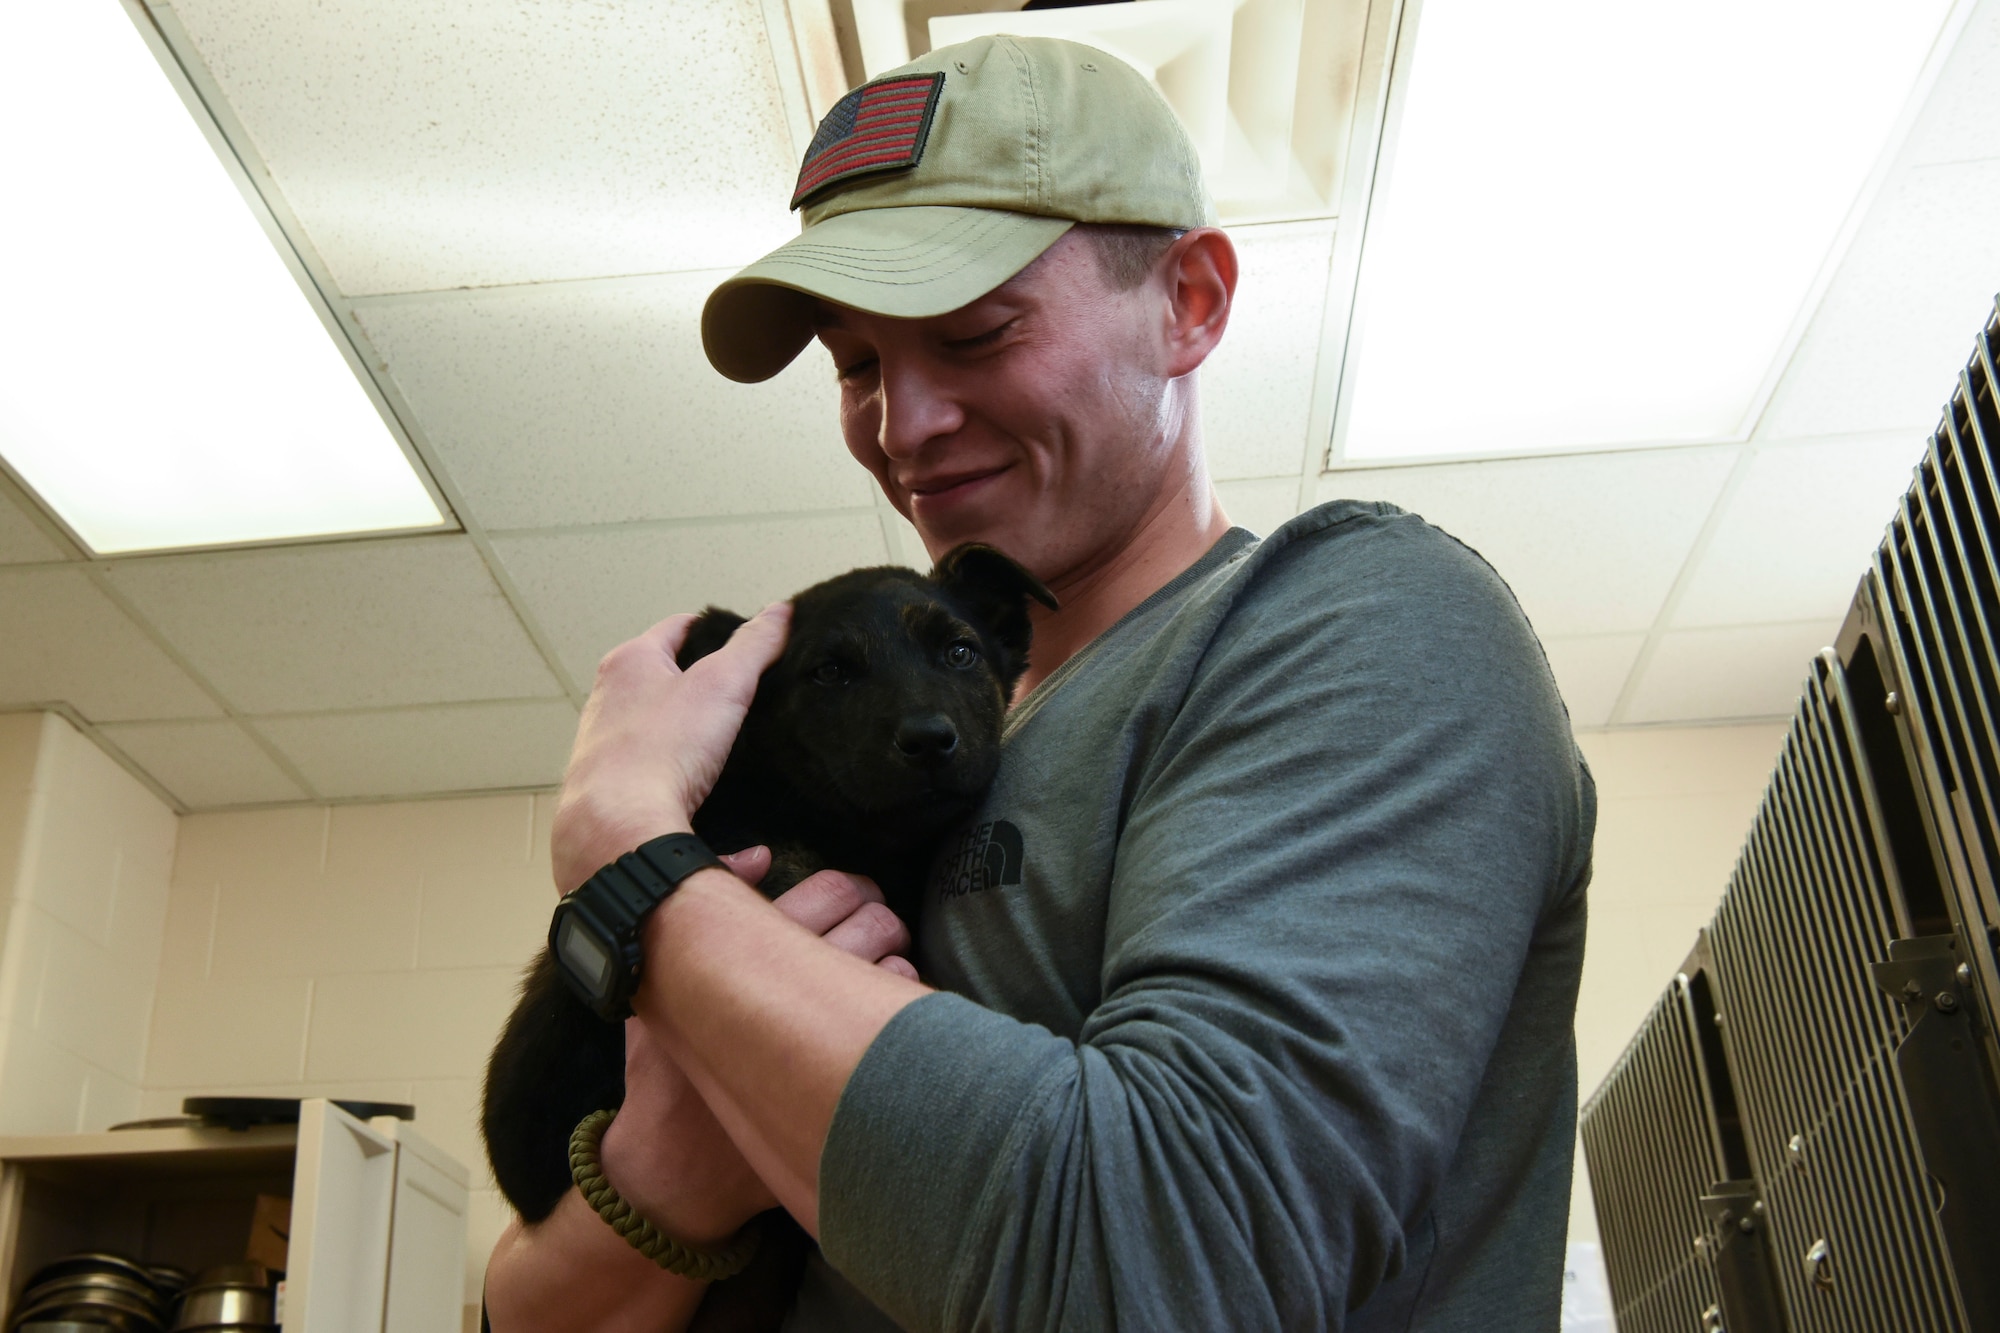 Senior Airman Dylan Schmidt, a 348th Reconnaissance Squadron sensor operator, enjoys some play-time with the animals while volunteering at Circle of Friends Humane Society Sept. 19, 2018, in Grand Forks, North Dakota. The volunteer leads suggested giving the animals attention, so Schmidt played with Bruce, a German Sheppard puppy. (U.S. Air Force photo by Airman 1st Class Melody Wolff)